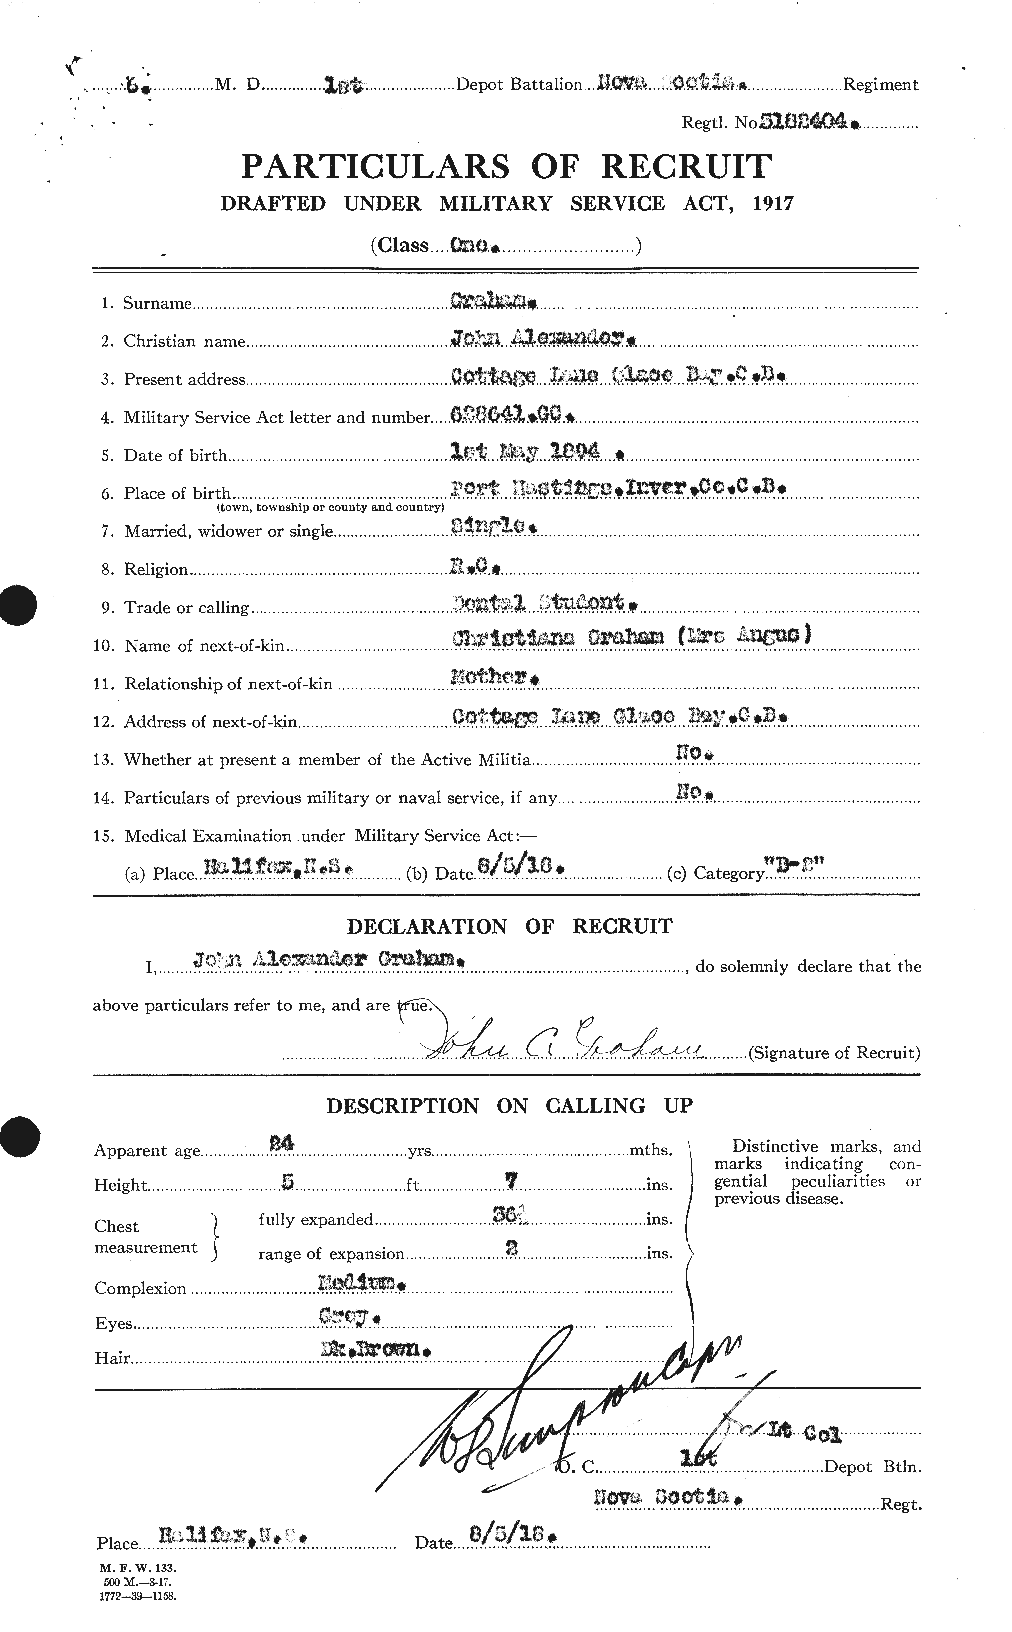 Personnel Records of the First World War - CEF 359151a